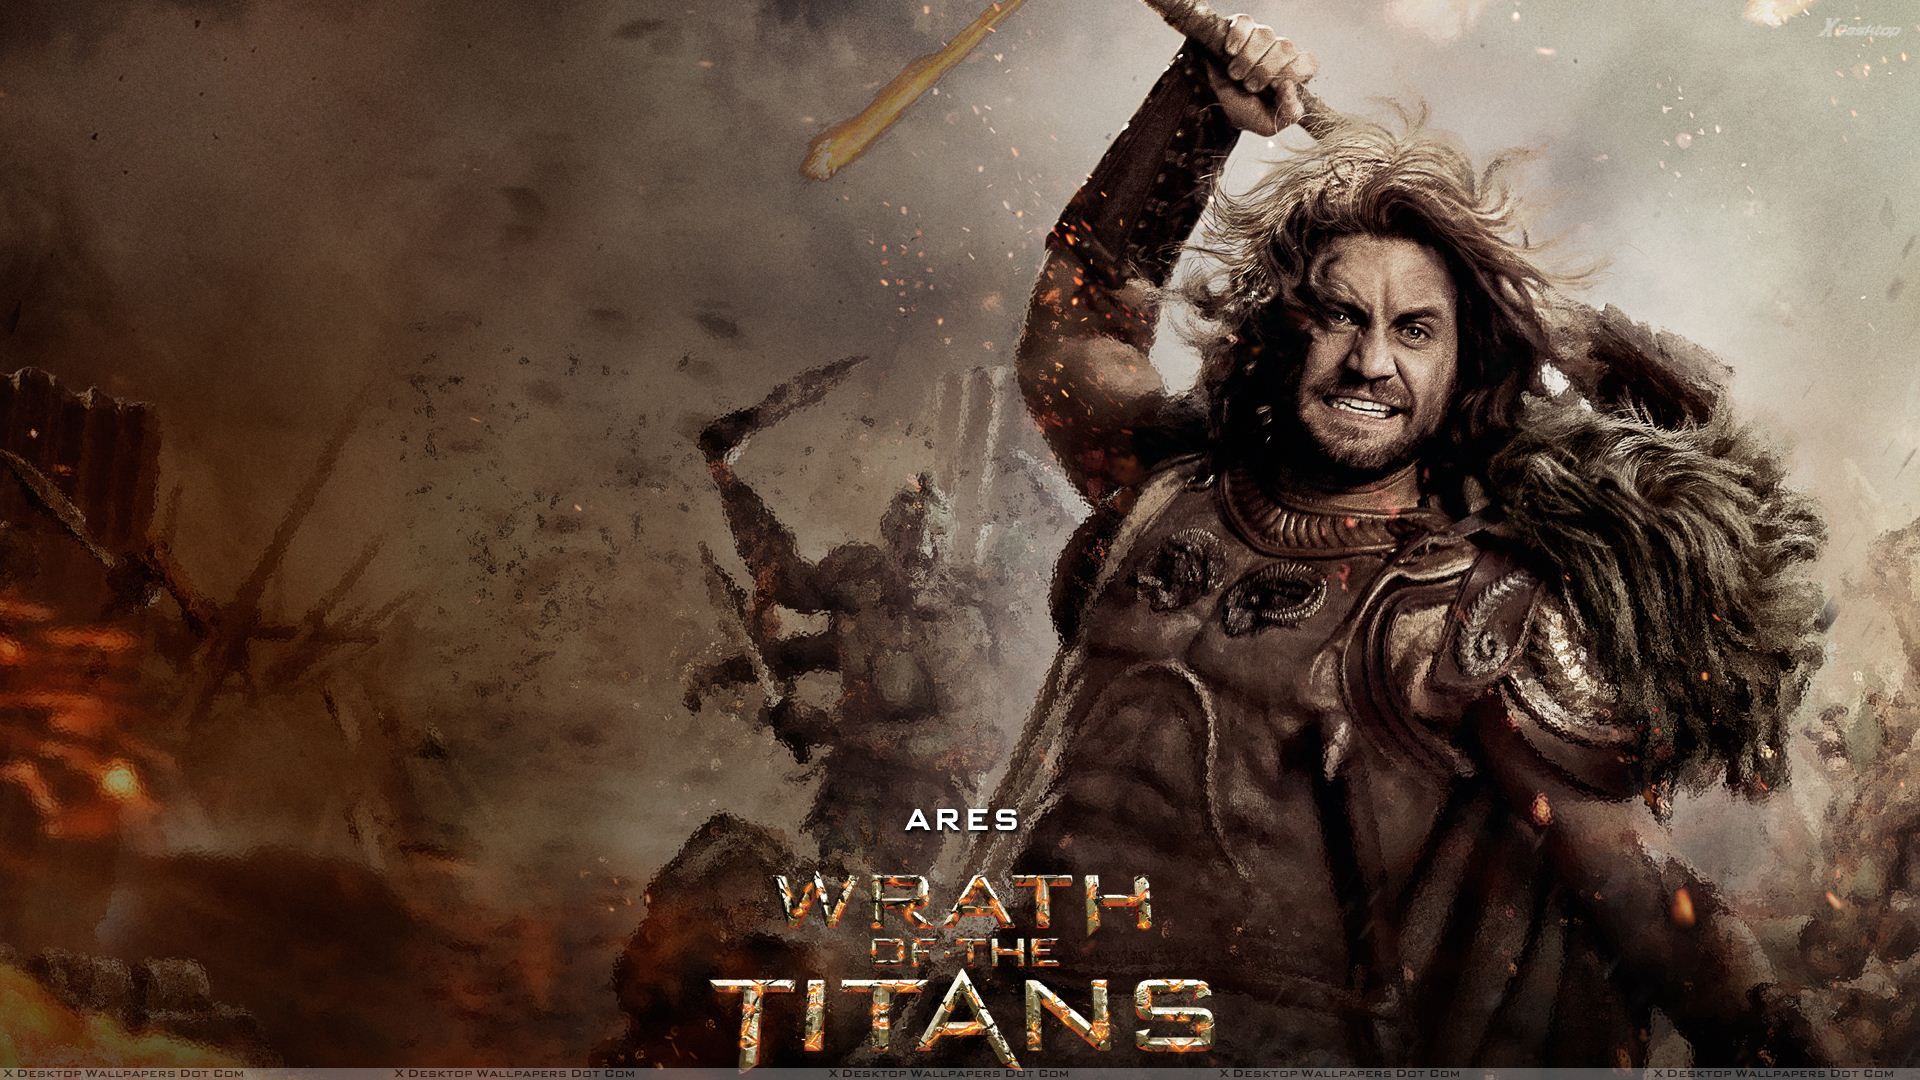 Wrath of the Titans Wallpaper, Photo & Image in HD